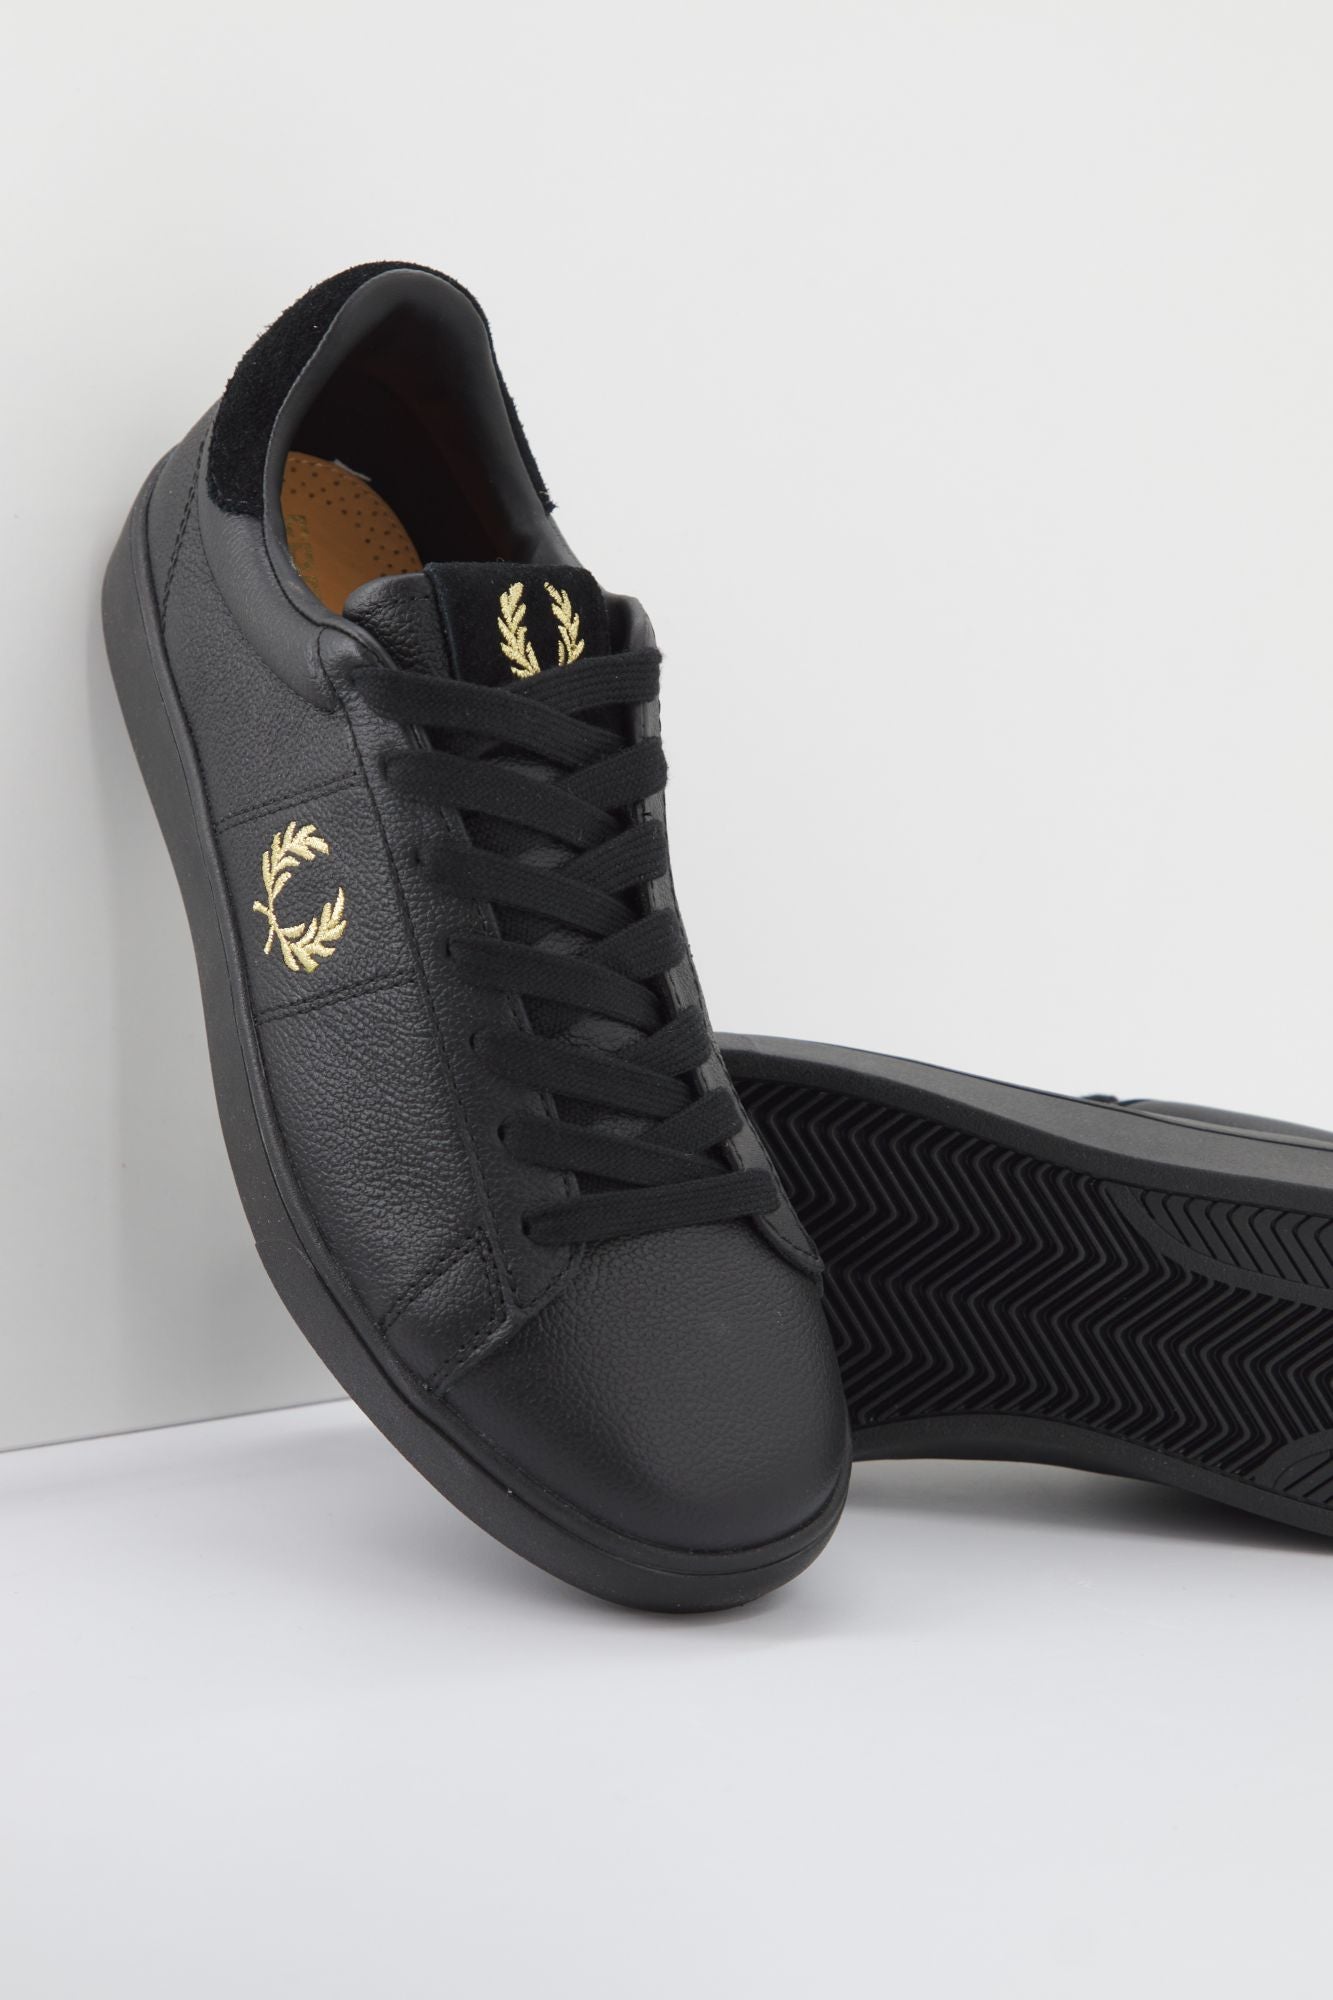 FRED PERRY SPENCER TUMBLED LTH en color NEGRO (3)